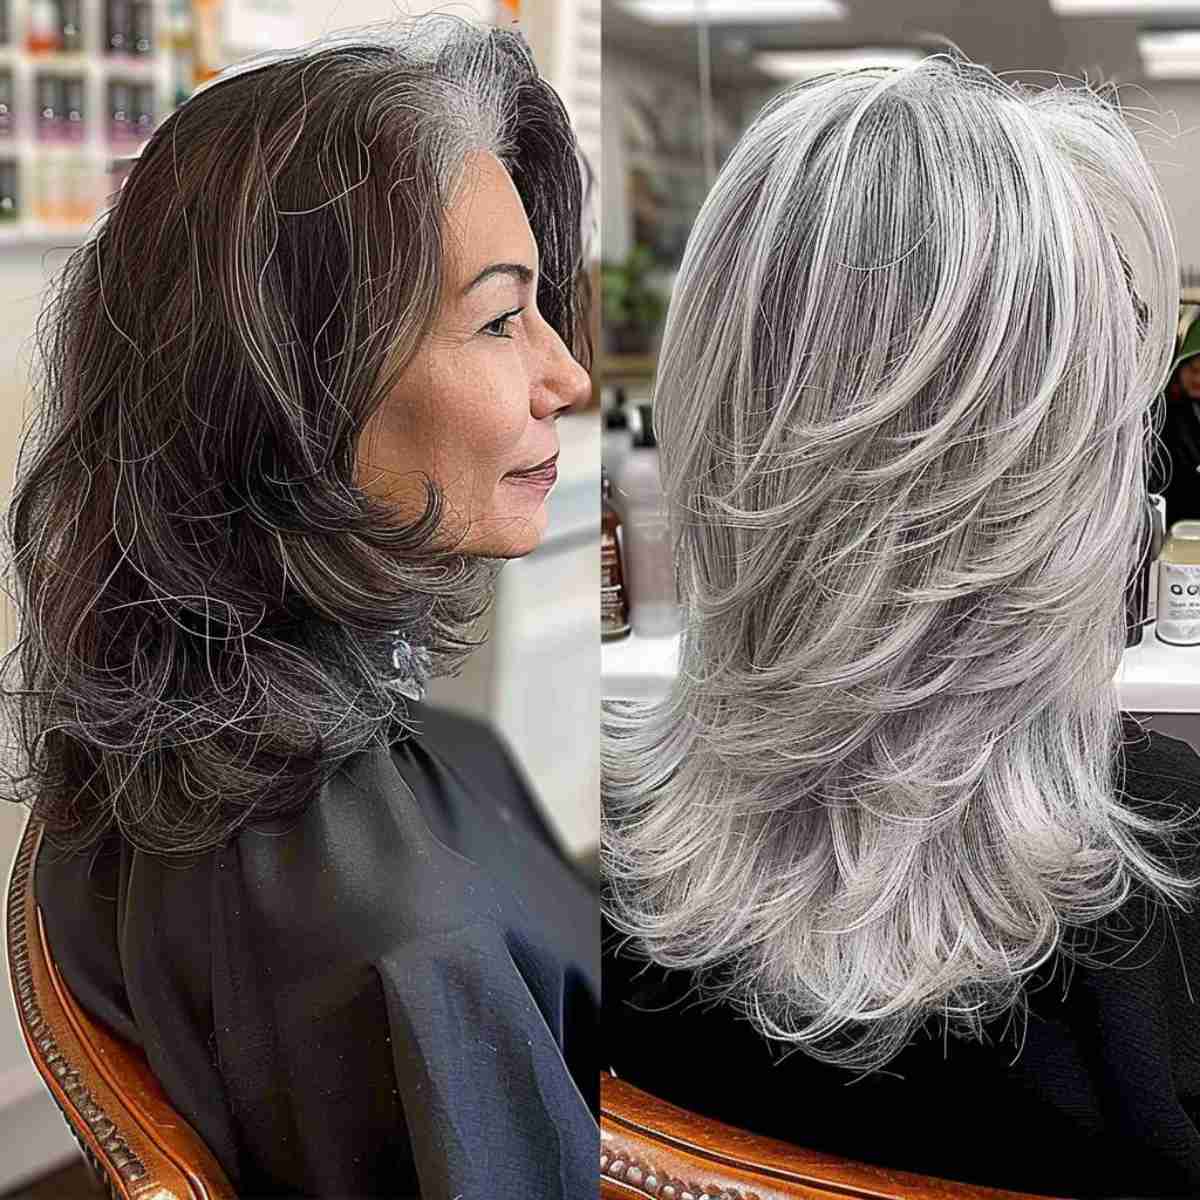 Mature woman's long wavy silver hair with short layers showing a graceful transition from natural dark roots